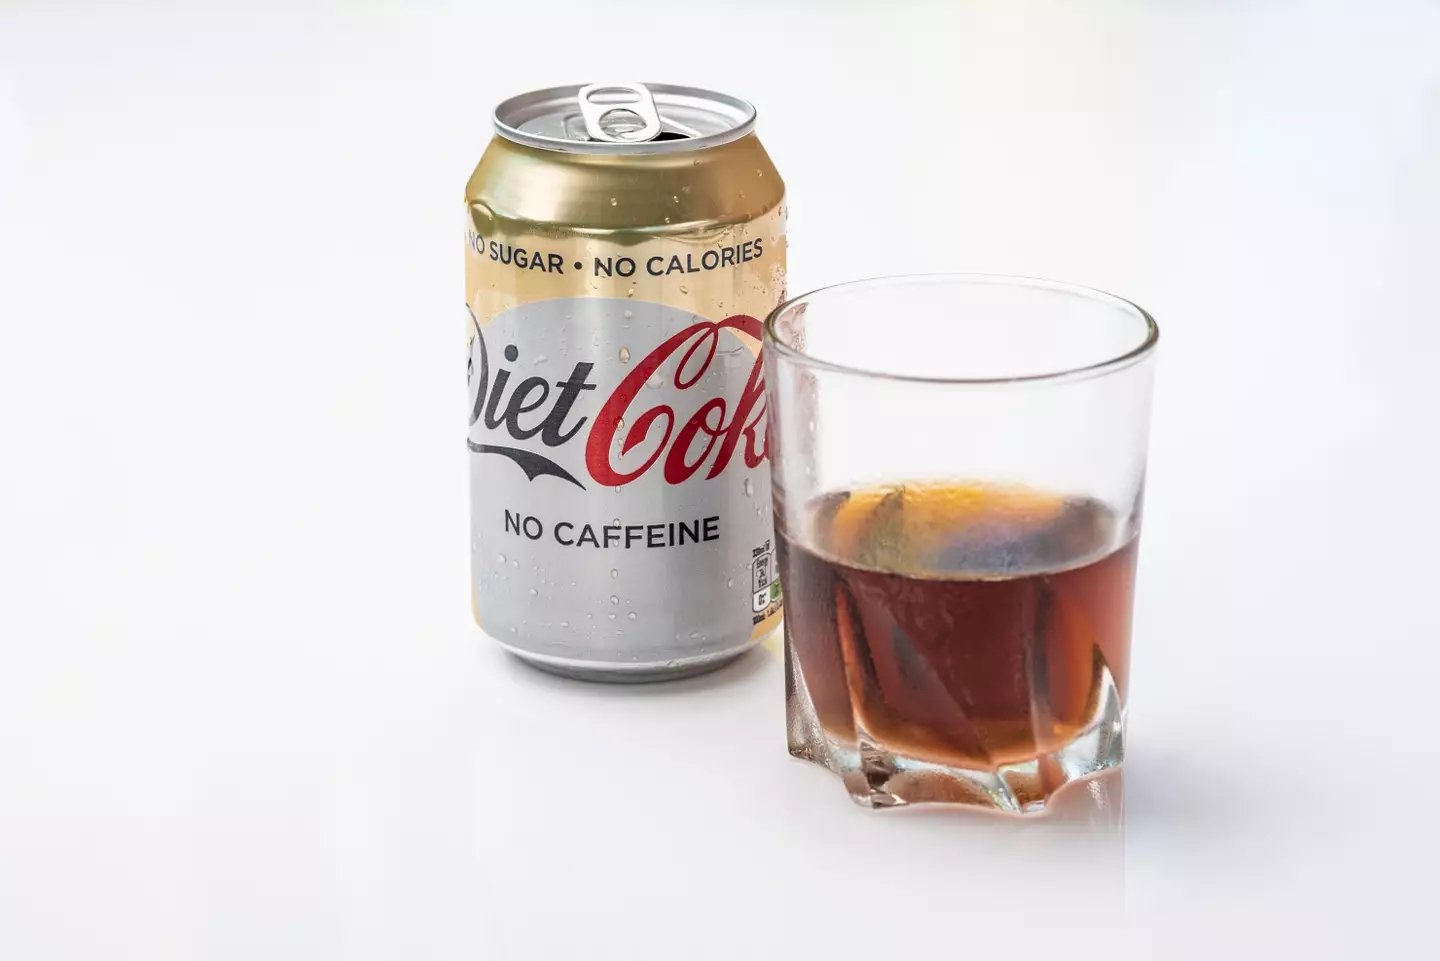 The theory is that when mixed with an alcoholic drink, Diet Coke will get you drunker faster than regular Coke.